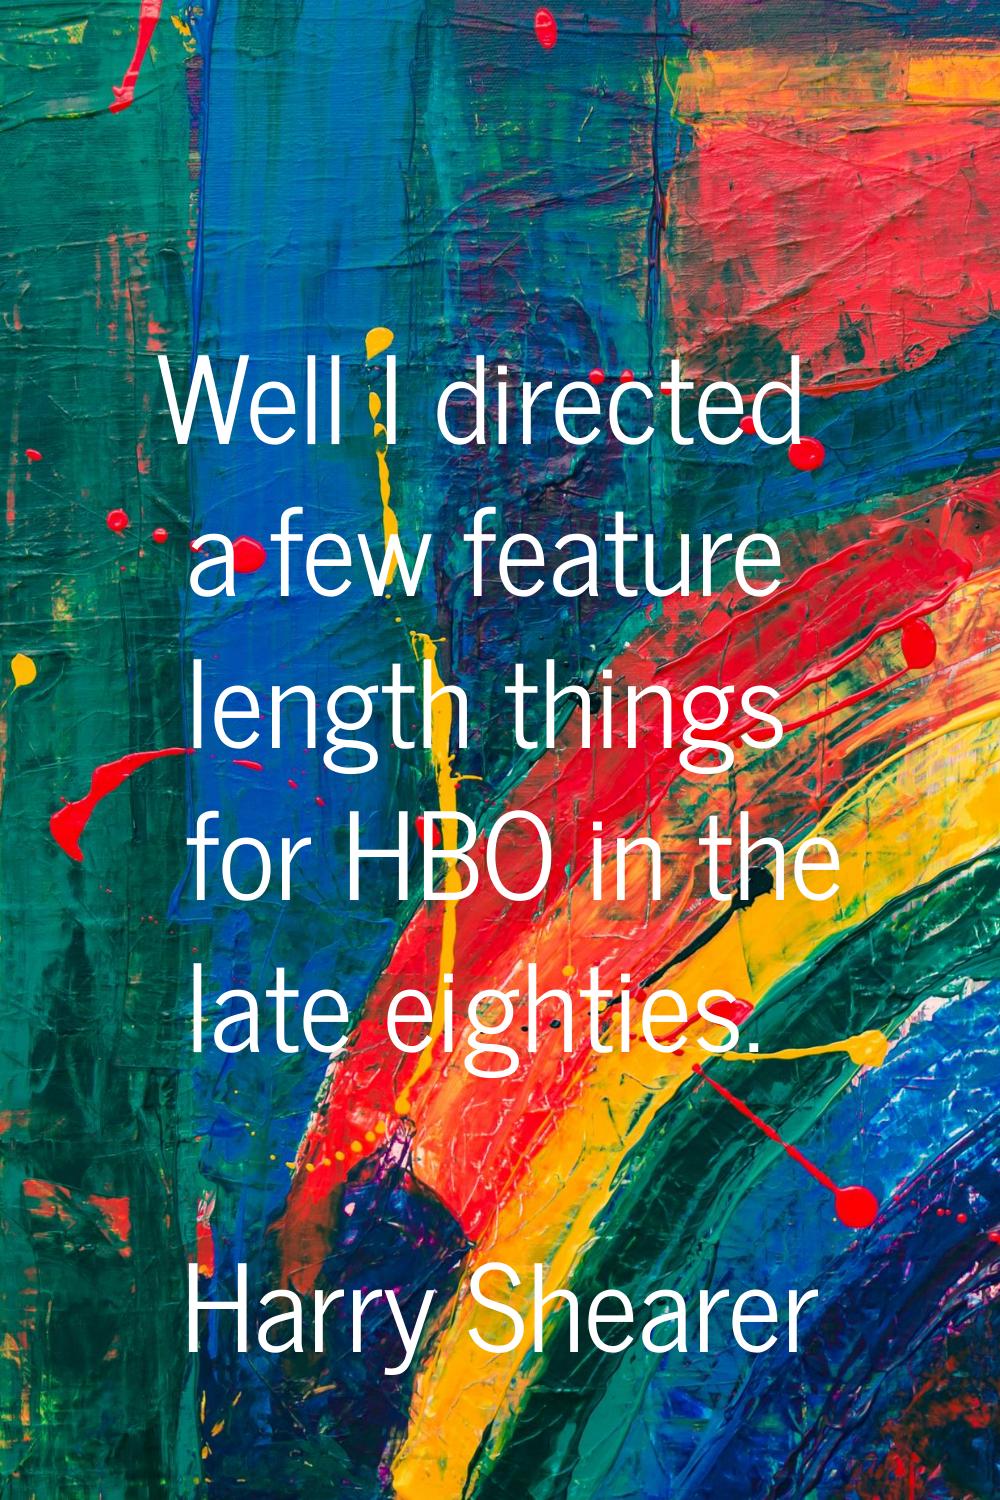 Well I directed a few feature length things for HBO in the late eighties.